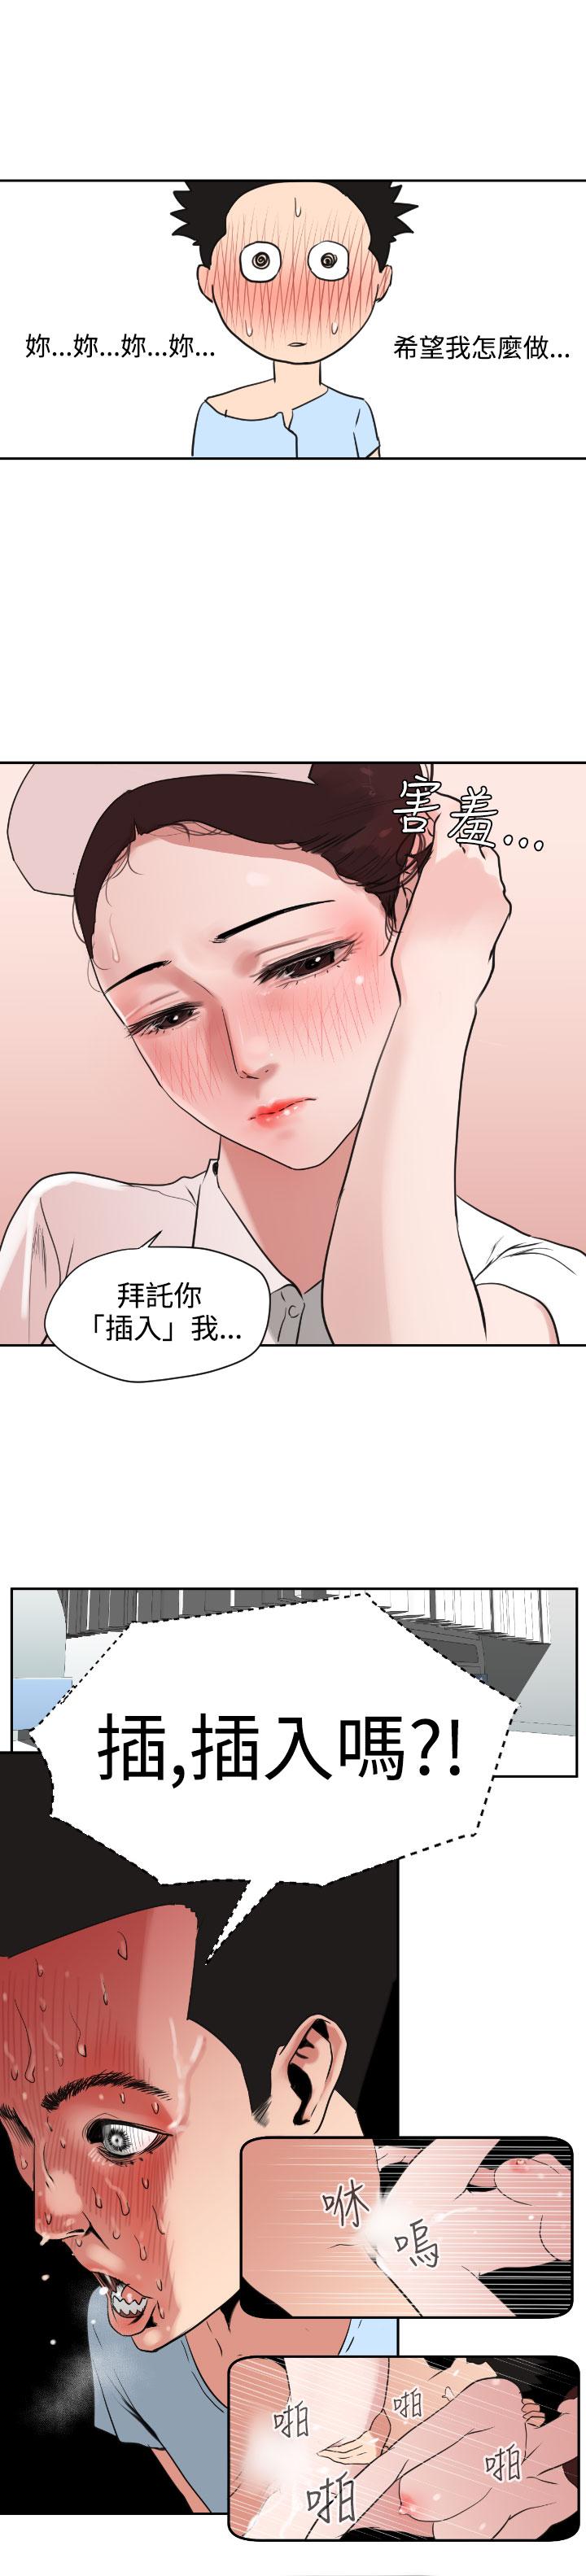 Desire King (慾求王) Ch.1-12 (chinese) 123